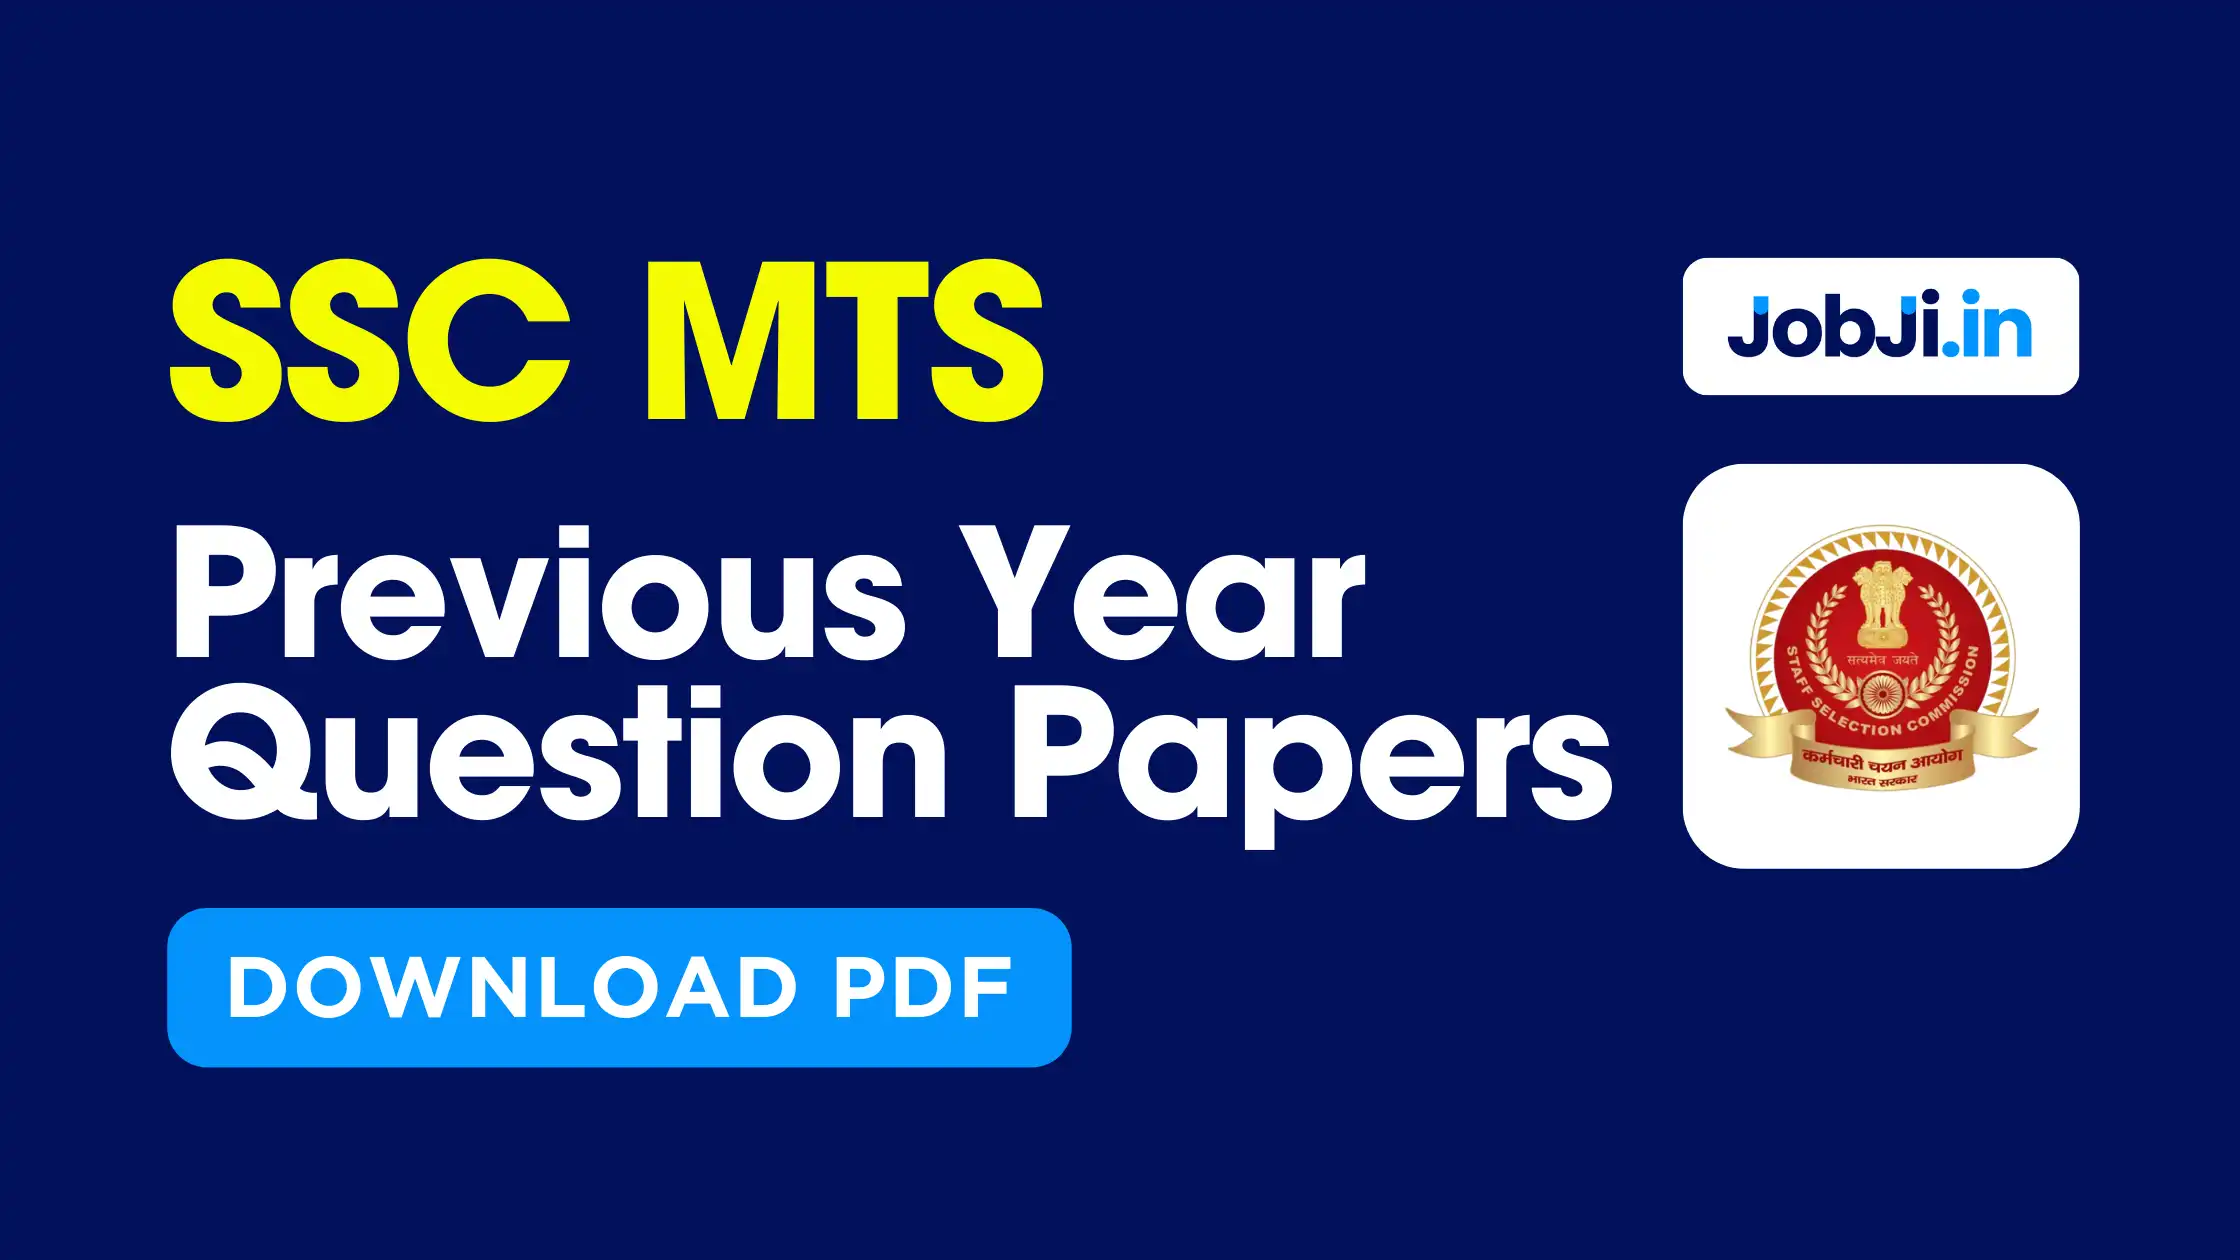 SSC MTS previous year question papers